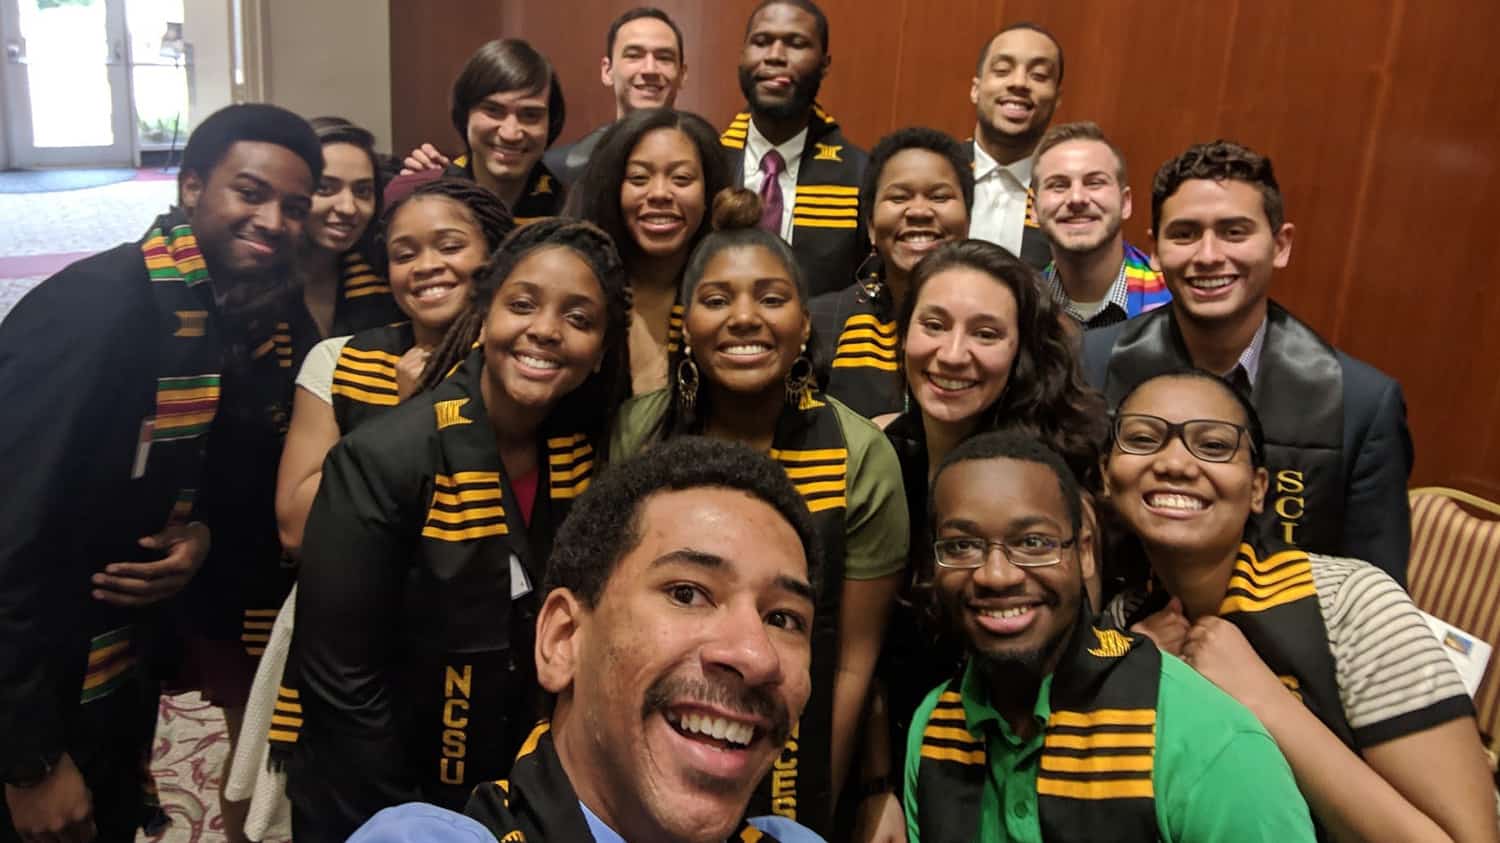 A group of diverse students pose for a selfie